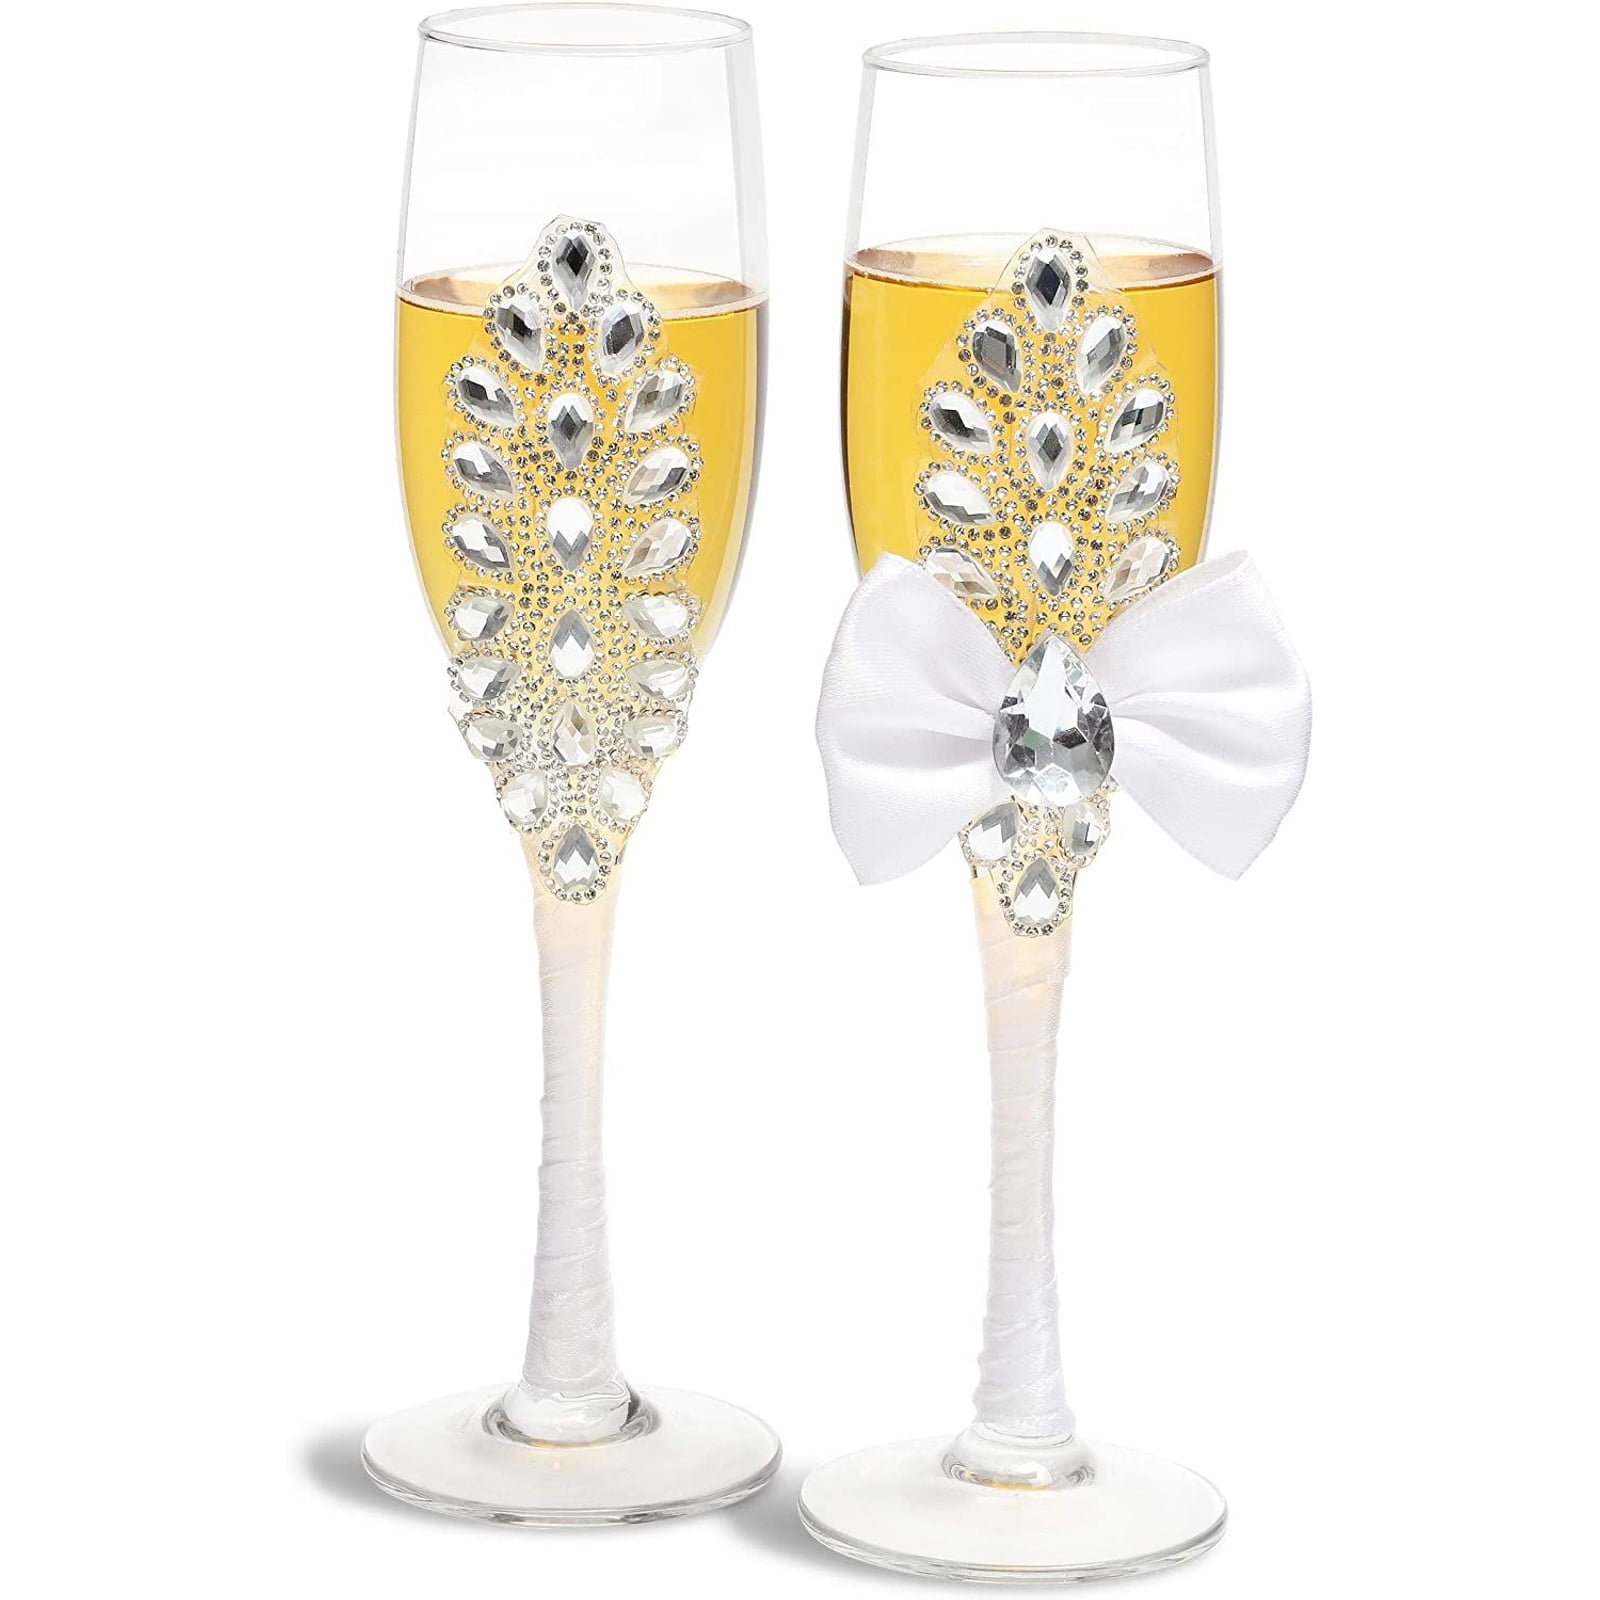 Mr Gold Print Elegant Design Bride & Groom Champagne Glasses for Toasting Comes w/ Elegant Gift Box Engagement Gift His and Hers Engagement Gifts & Mrs Wedding Champagne Flutes